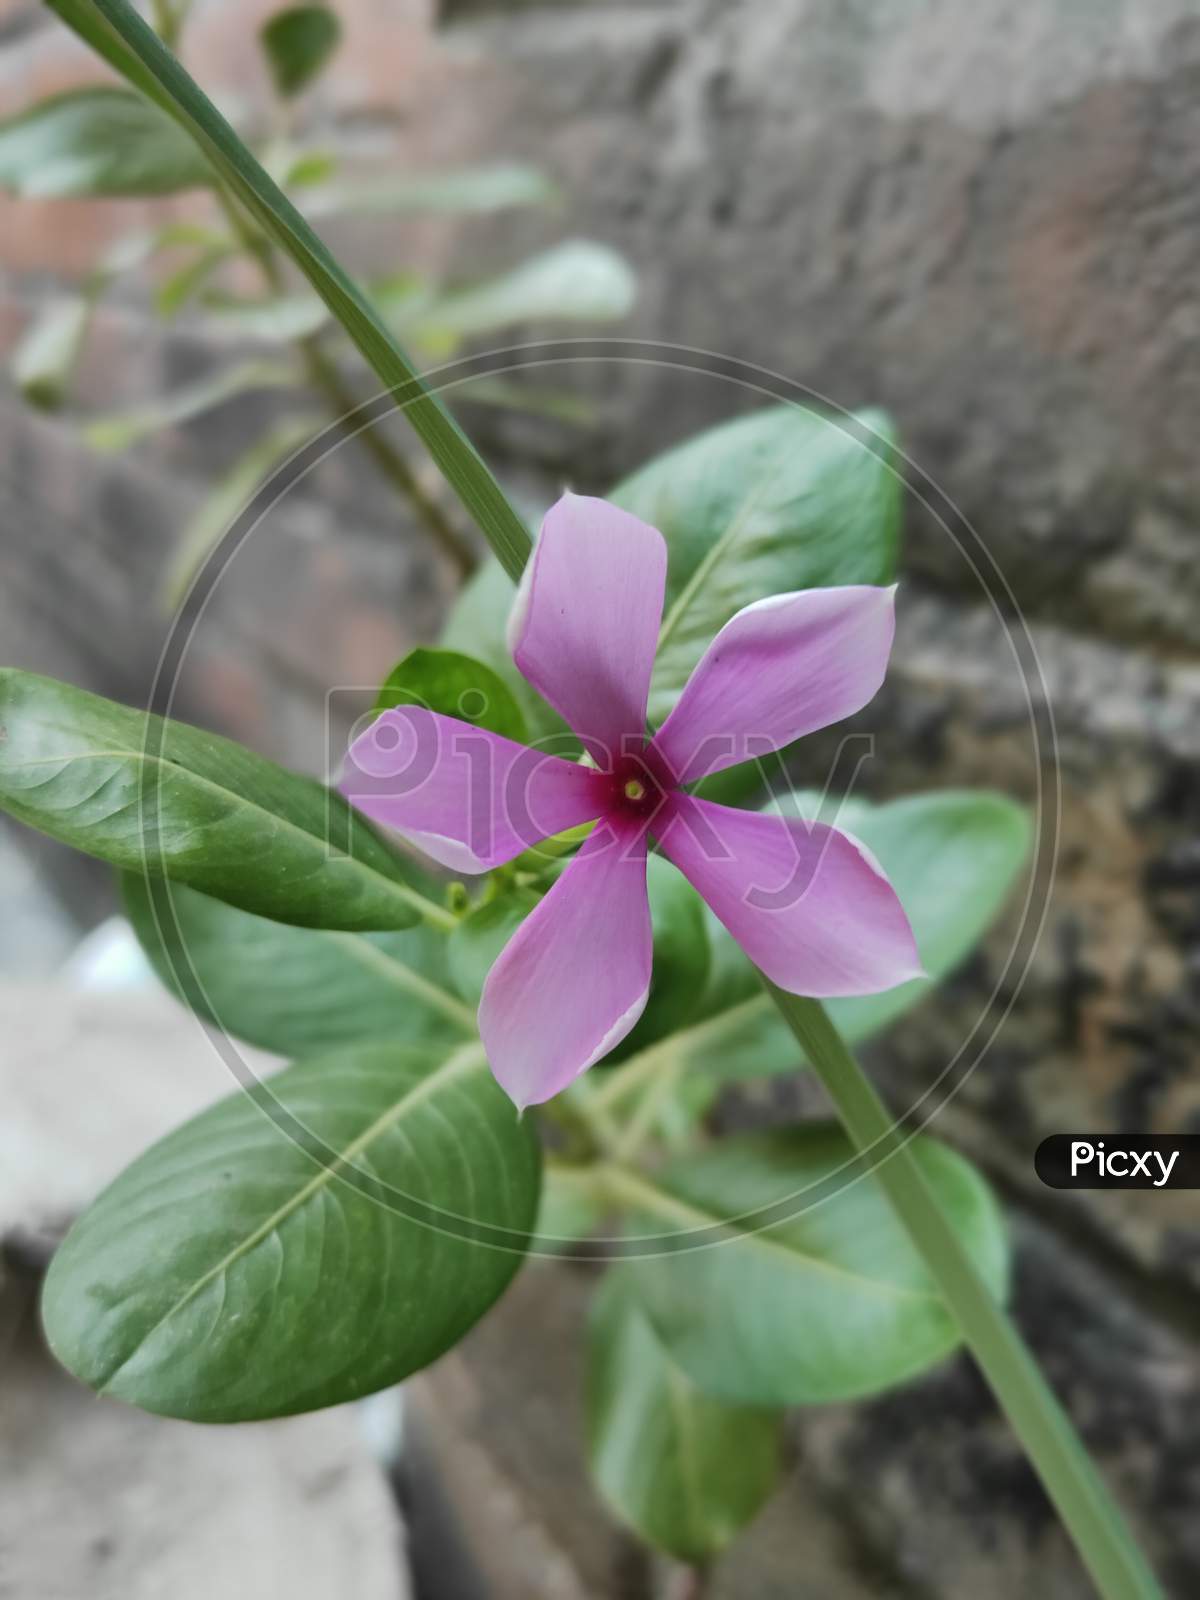 Periwinkle Plant With Pink Flowers, Selective Focus